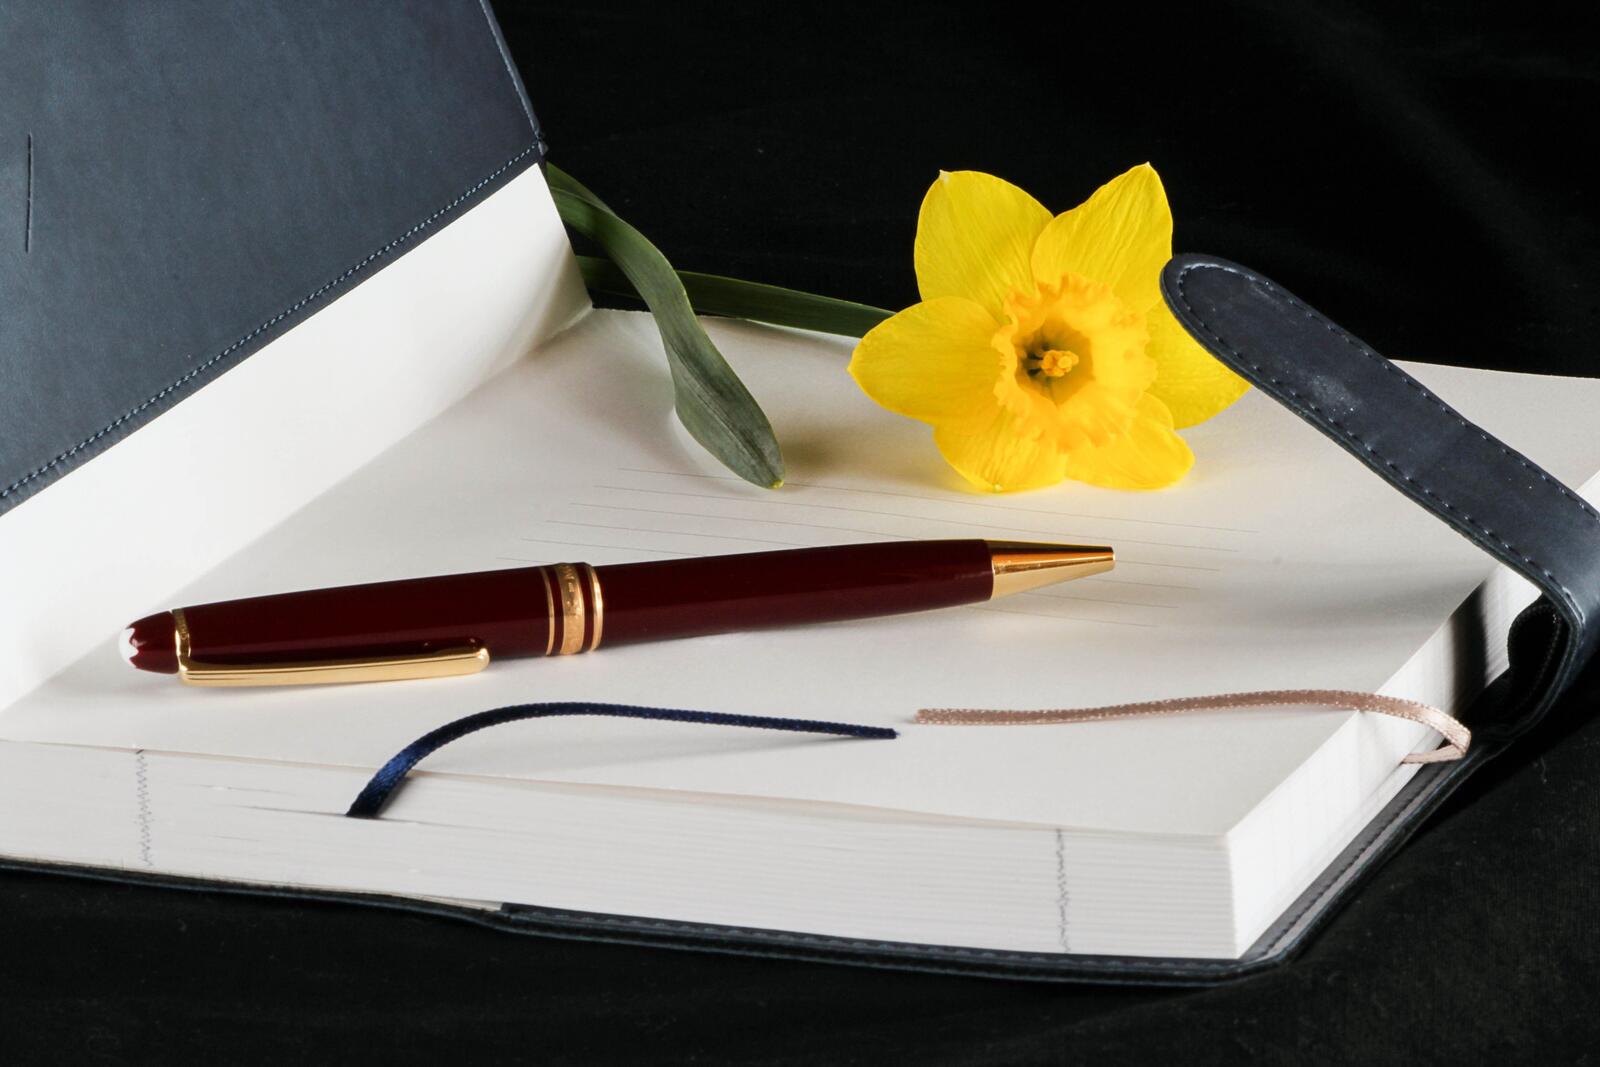 Free photo The yellow flower lies on the diary